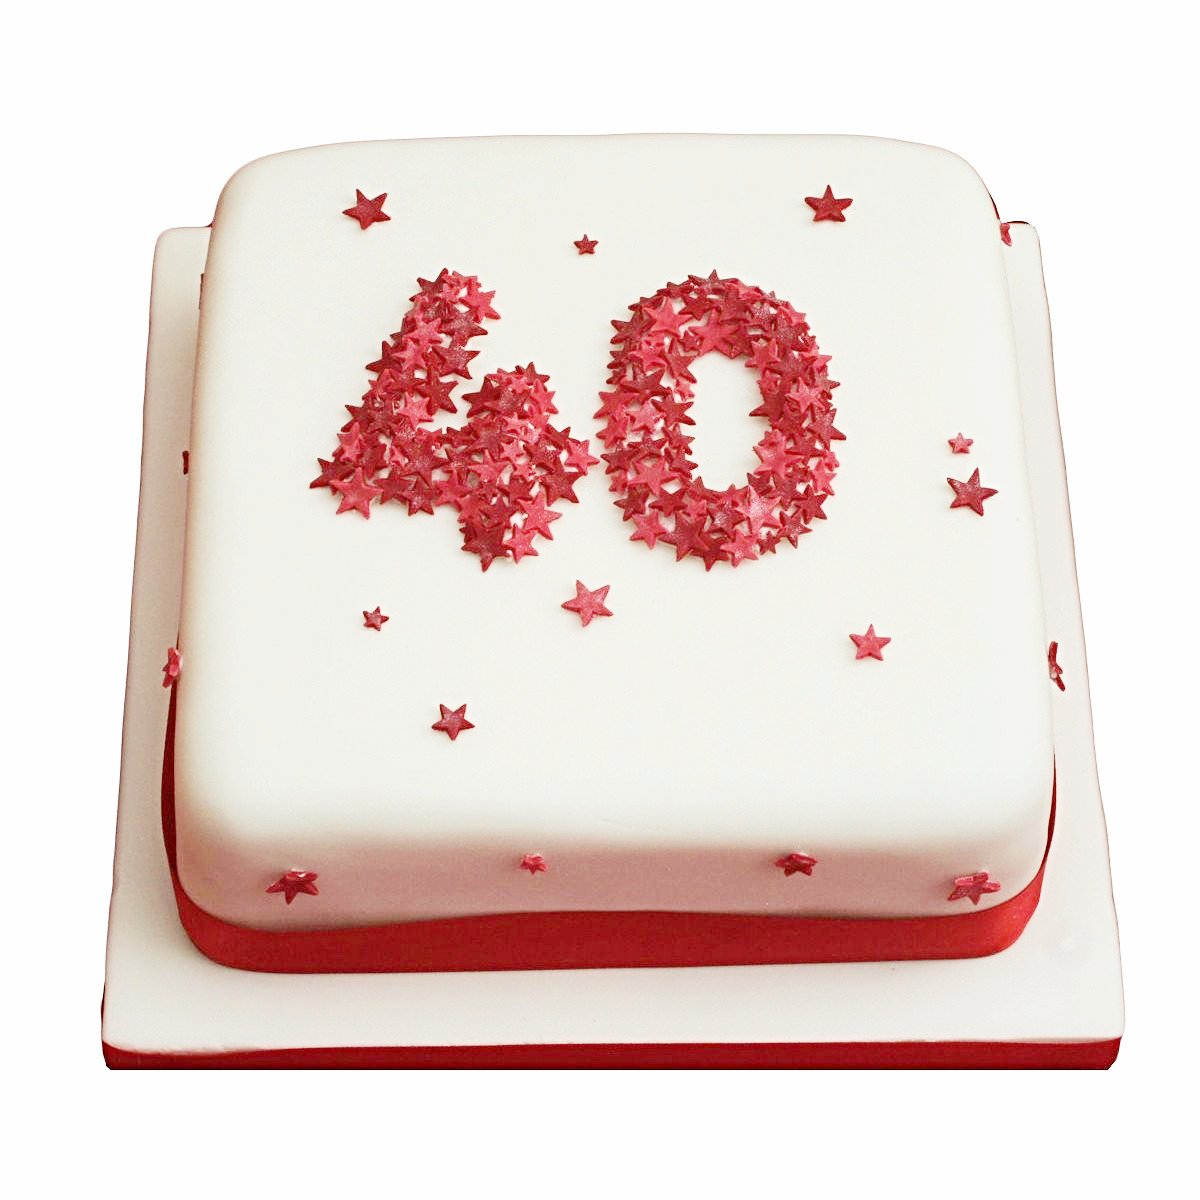 Ruby Wedding Anniversary Cake - Buy Online, Free UK Delivery — New Cakes